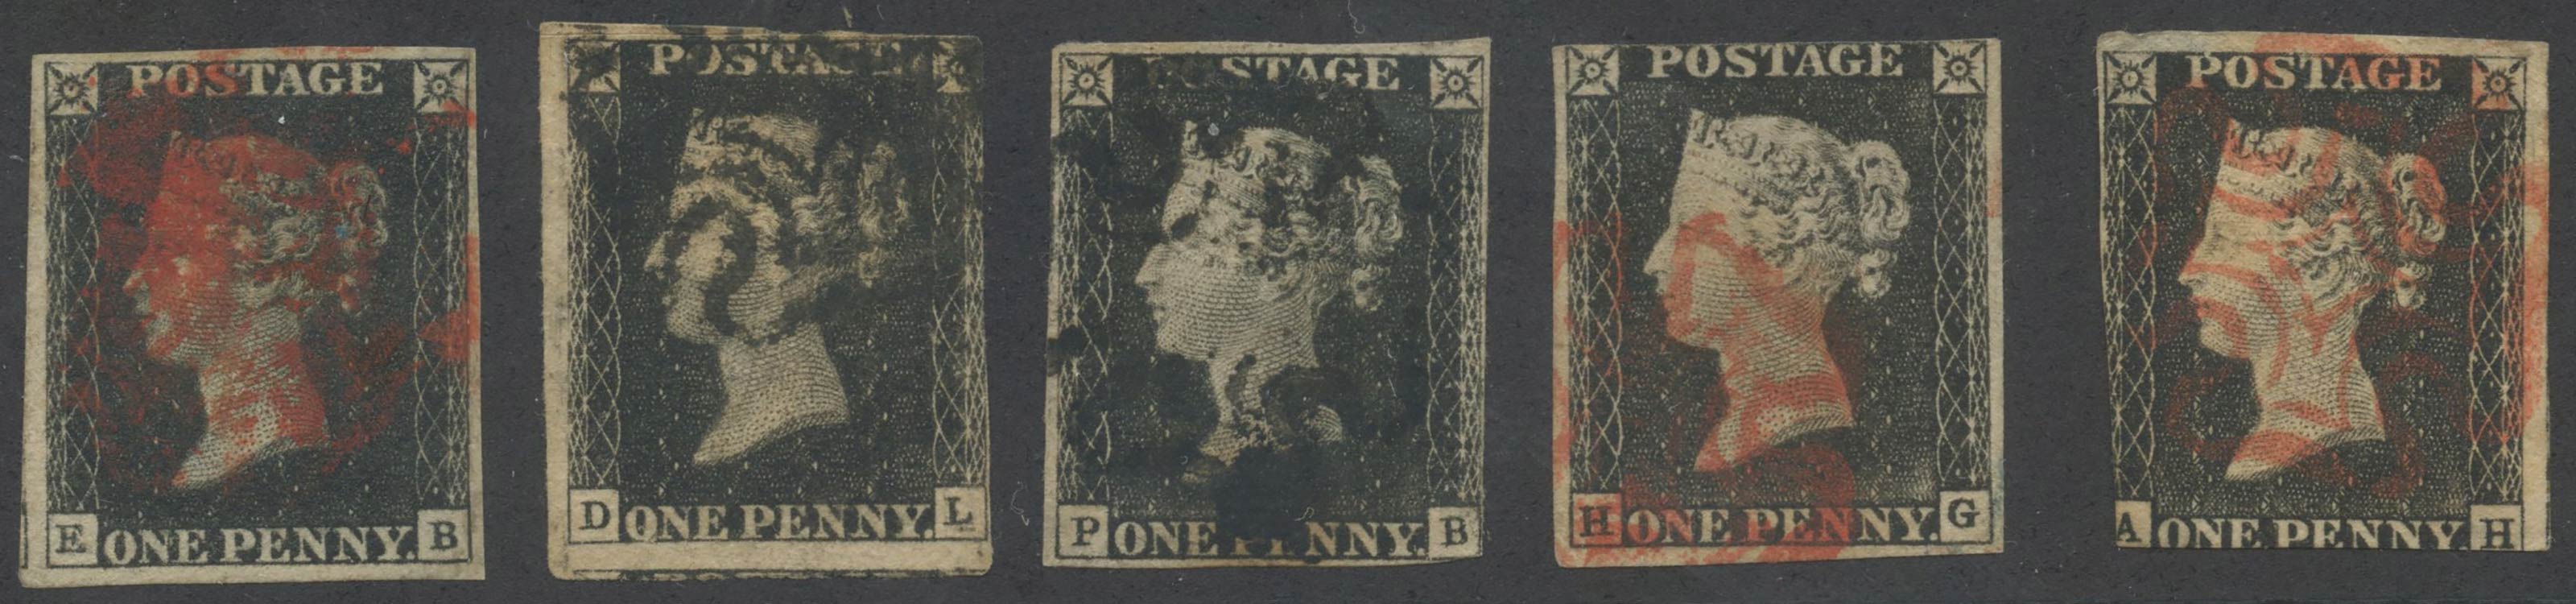 1840, Penny Black, 5 stamps of ... 